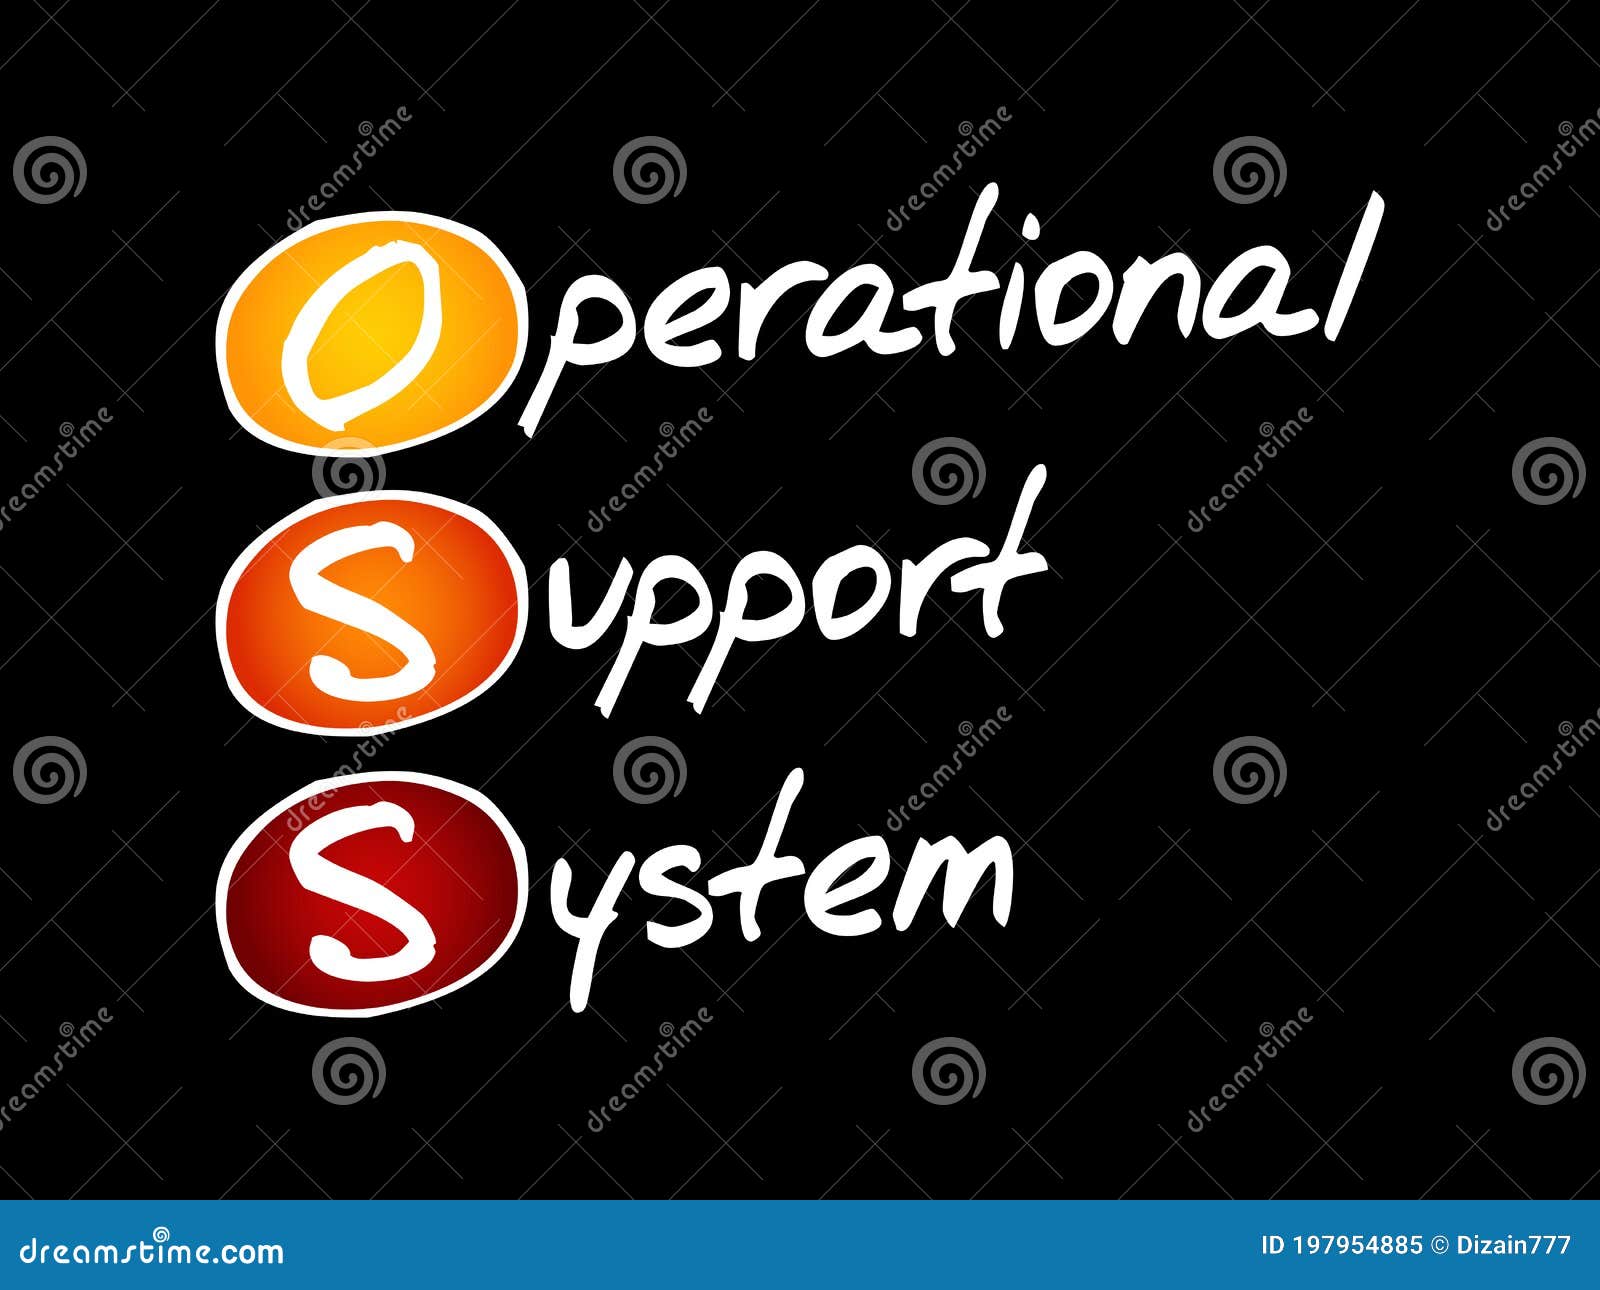 oss - operational support system acronym